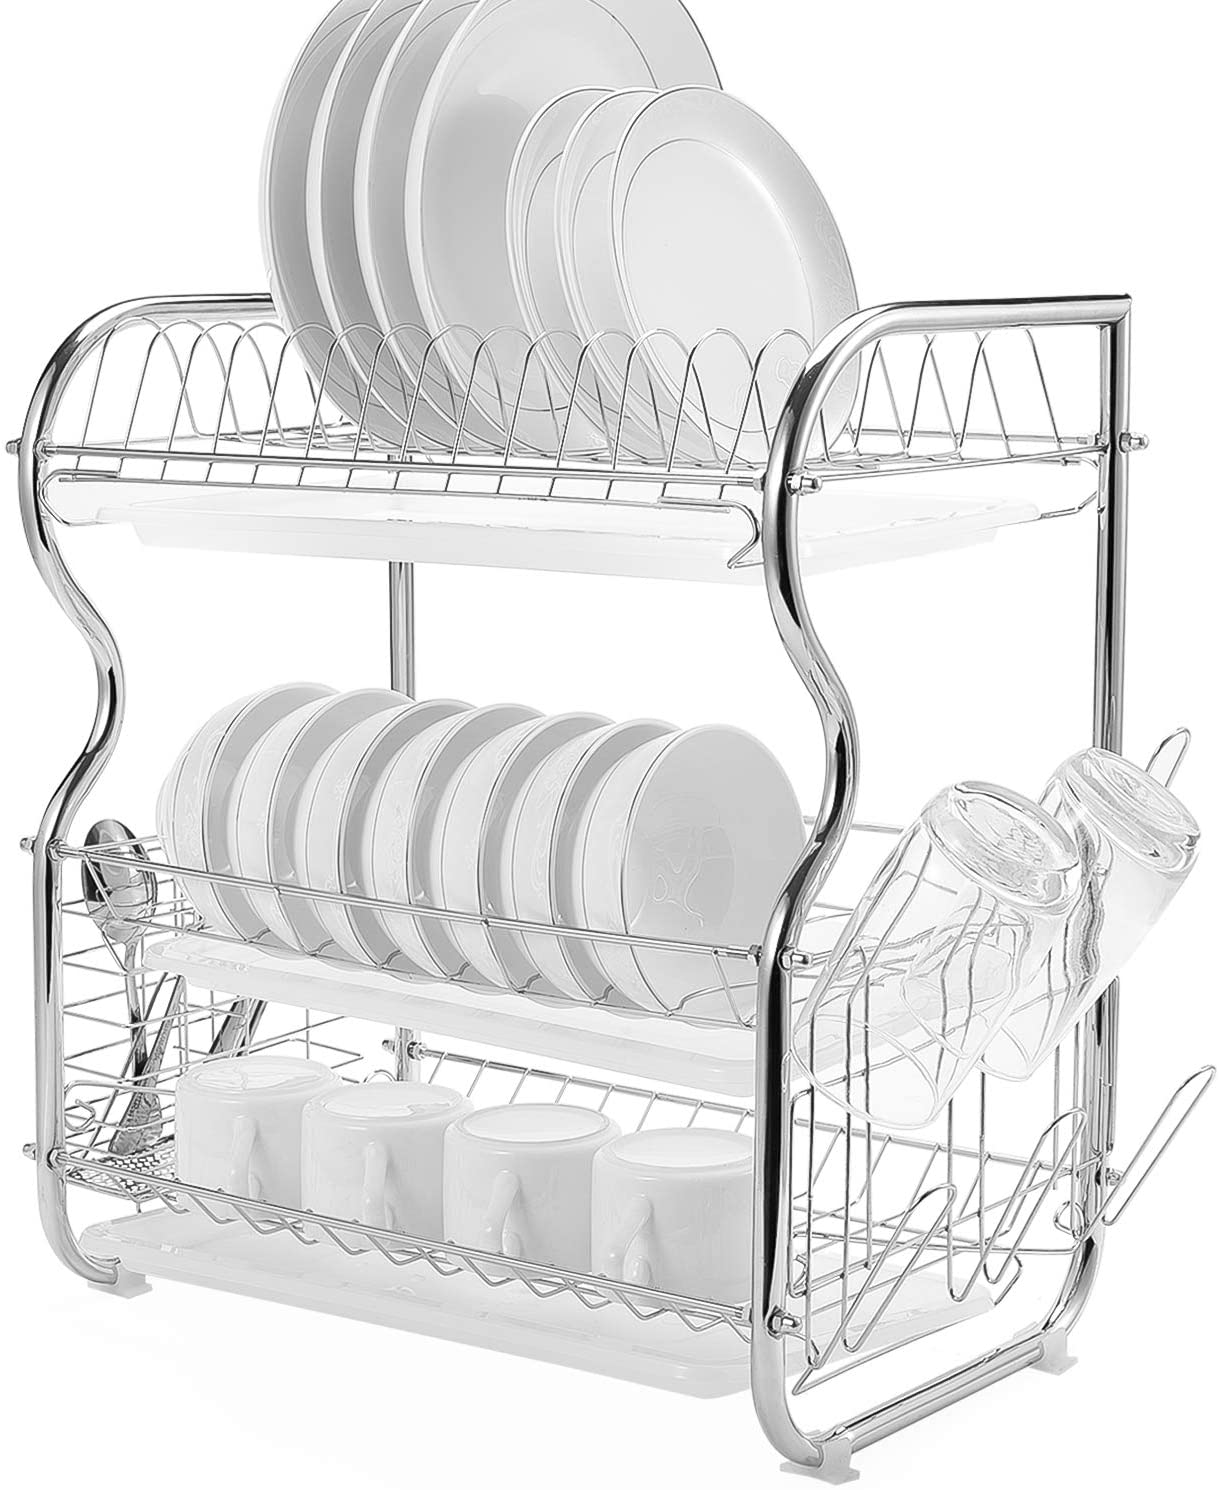 3 Tier Dish Rack with Utensil Holder, Cup Holder and Dish Drainer